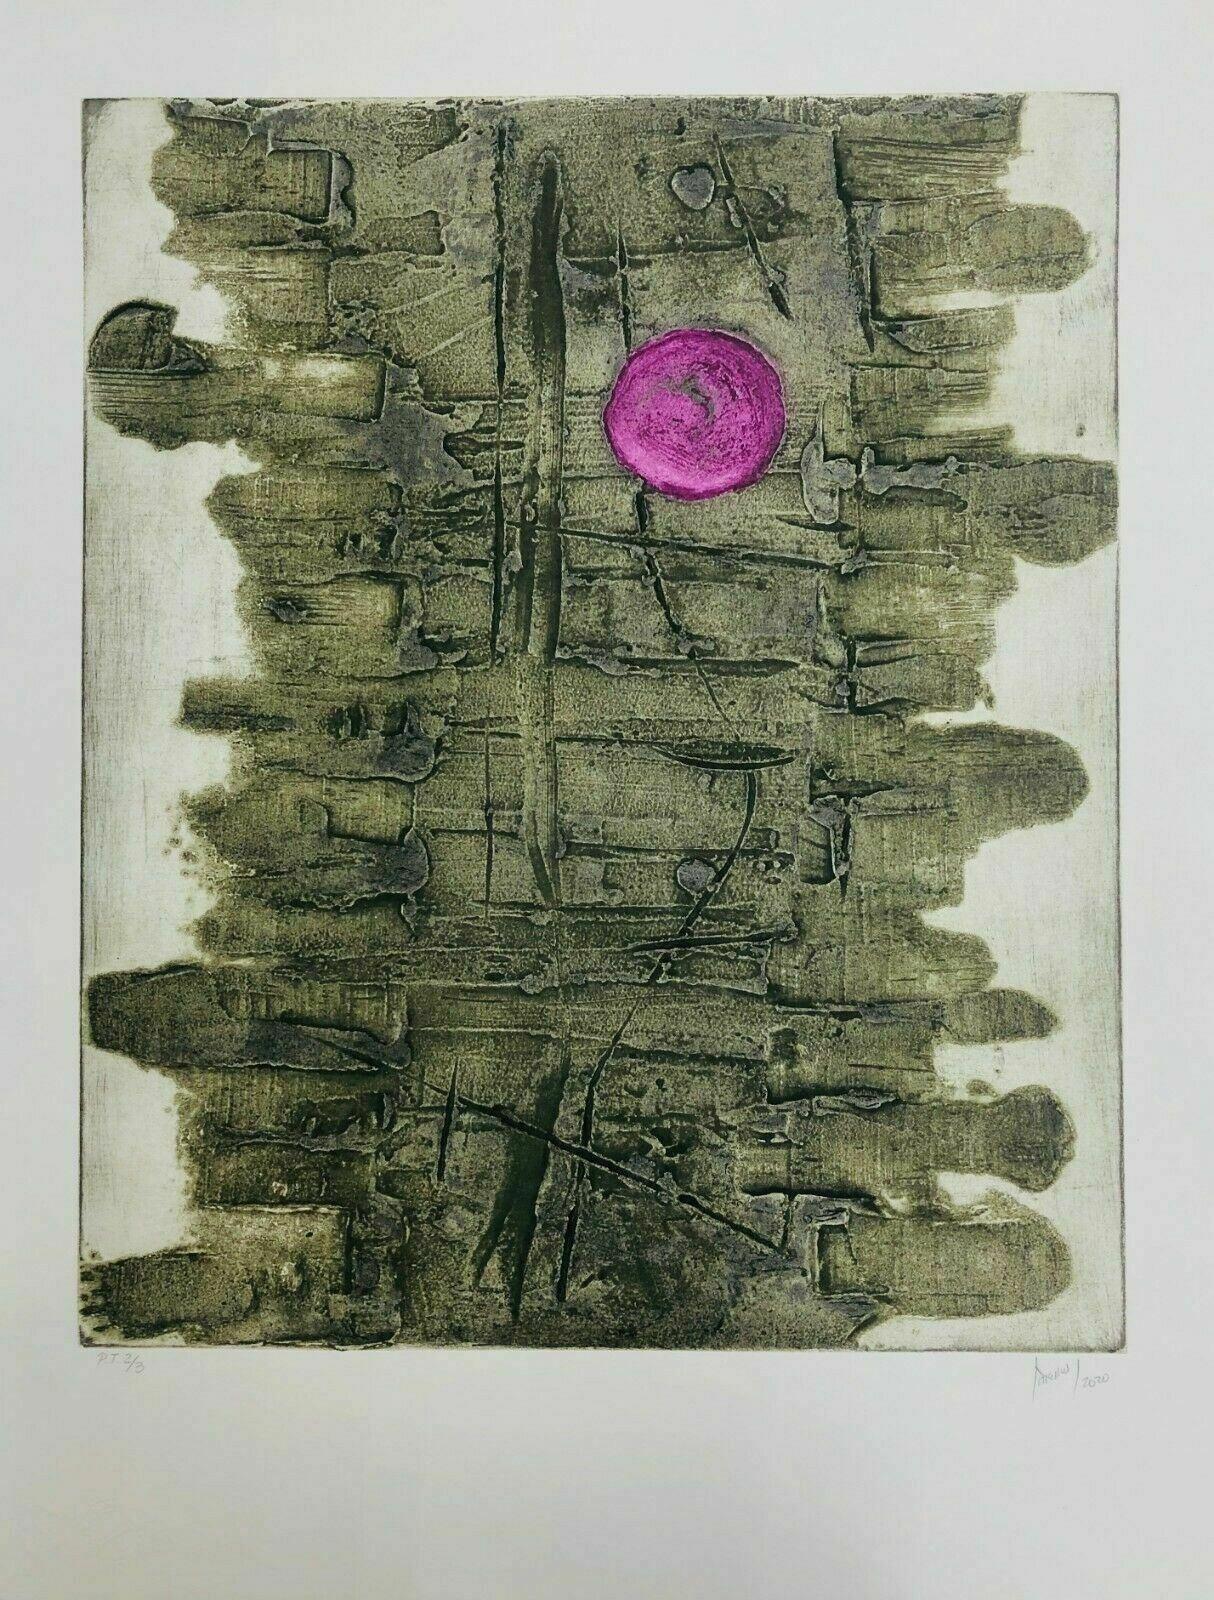 Adan Paredes, ¨Untitled¨, 2020, Collagraph, 28.3x22 in